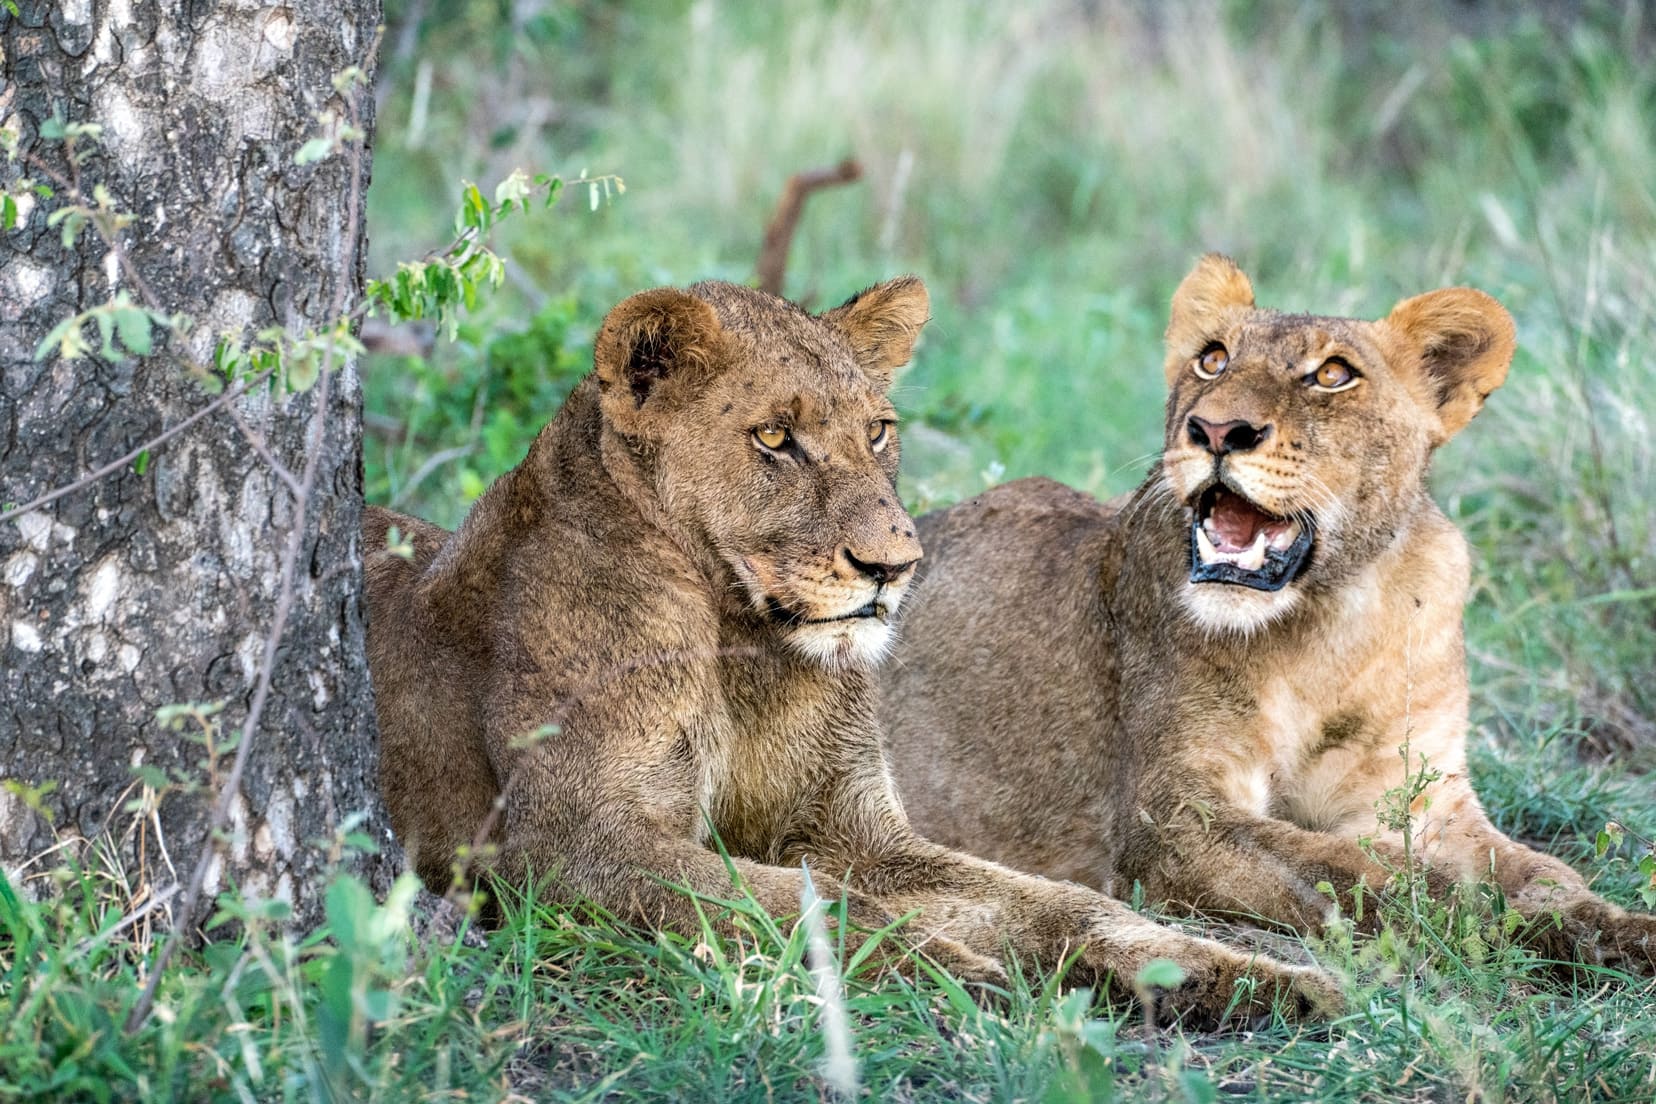 adolescent lions rest under a tree after a feed